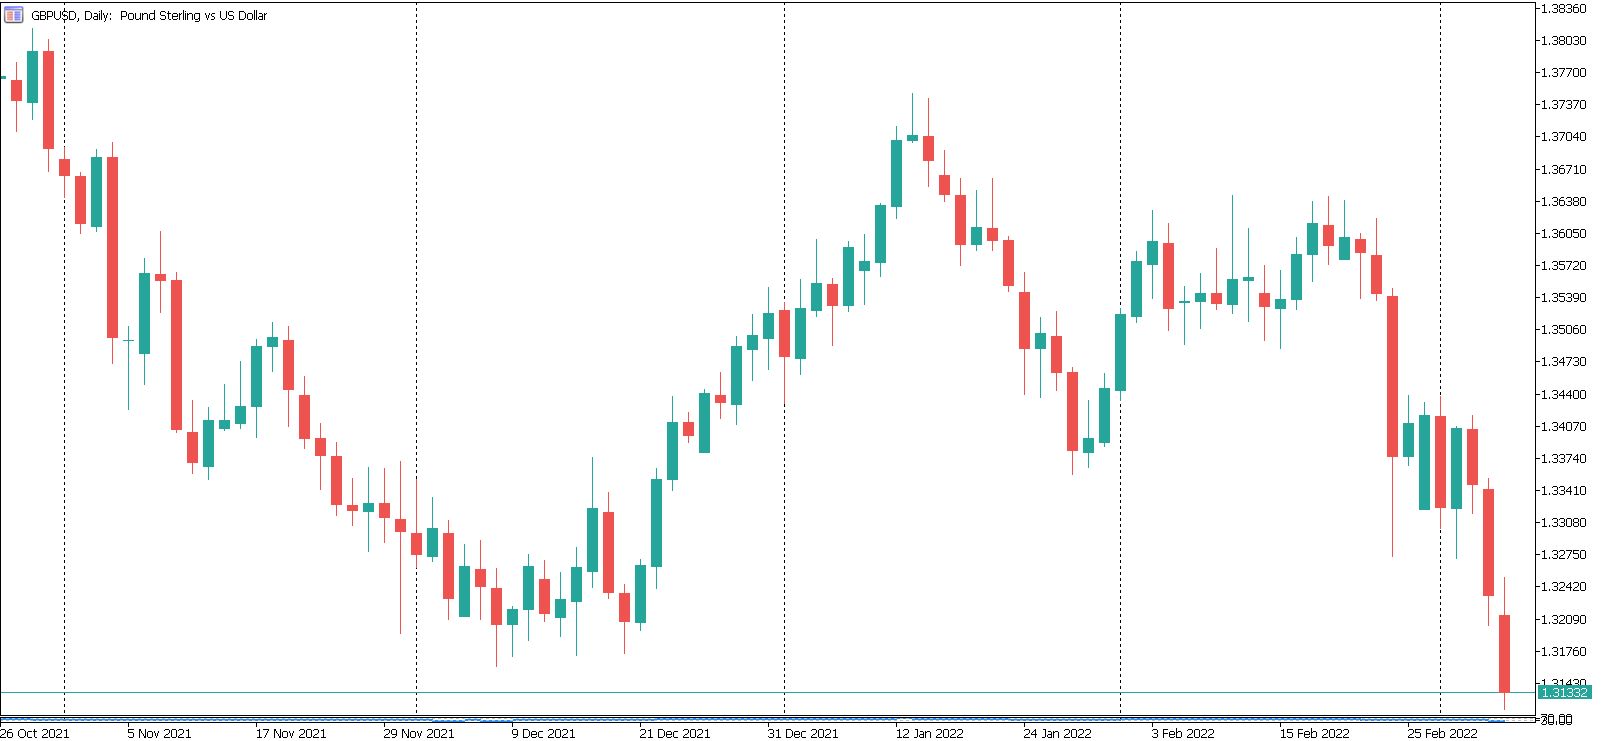 Technical analysis in Forex market. Japanese candles or candlesticks